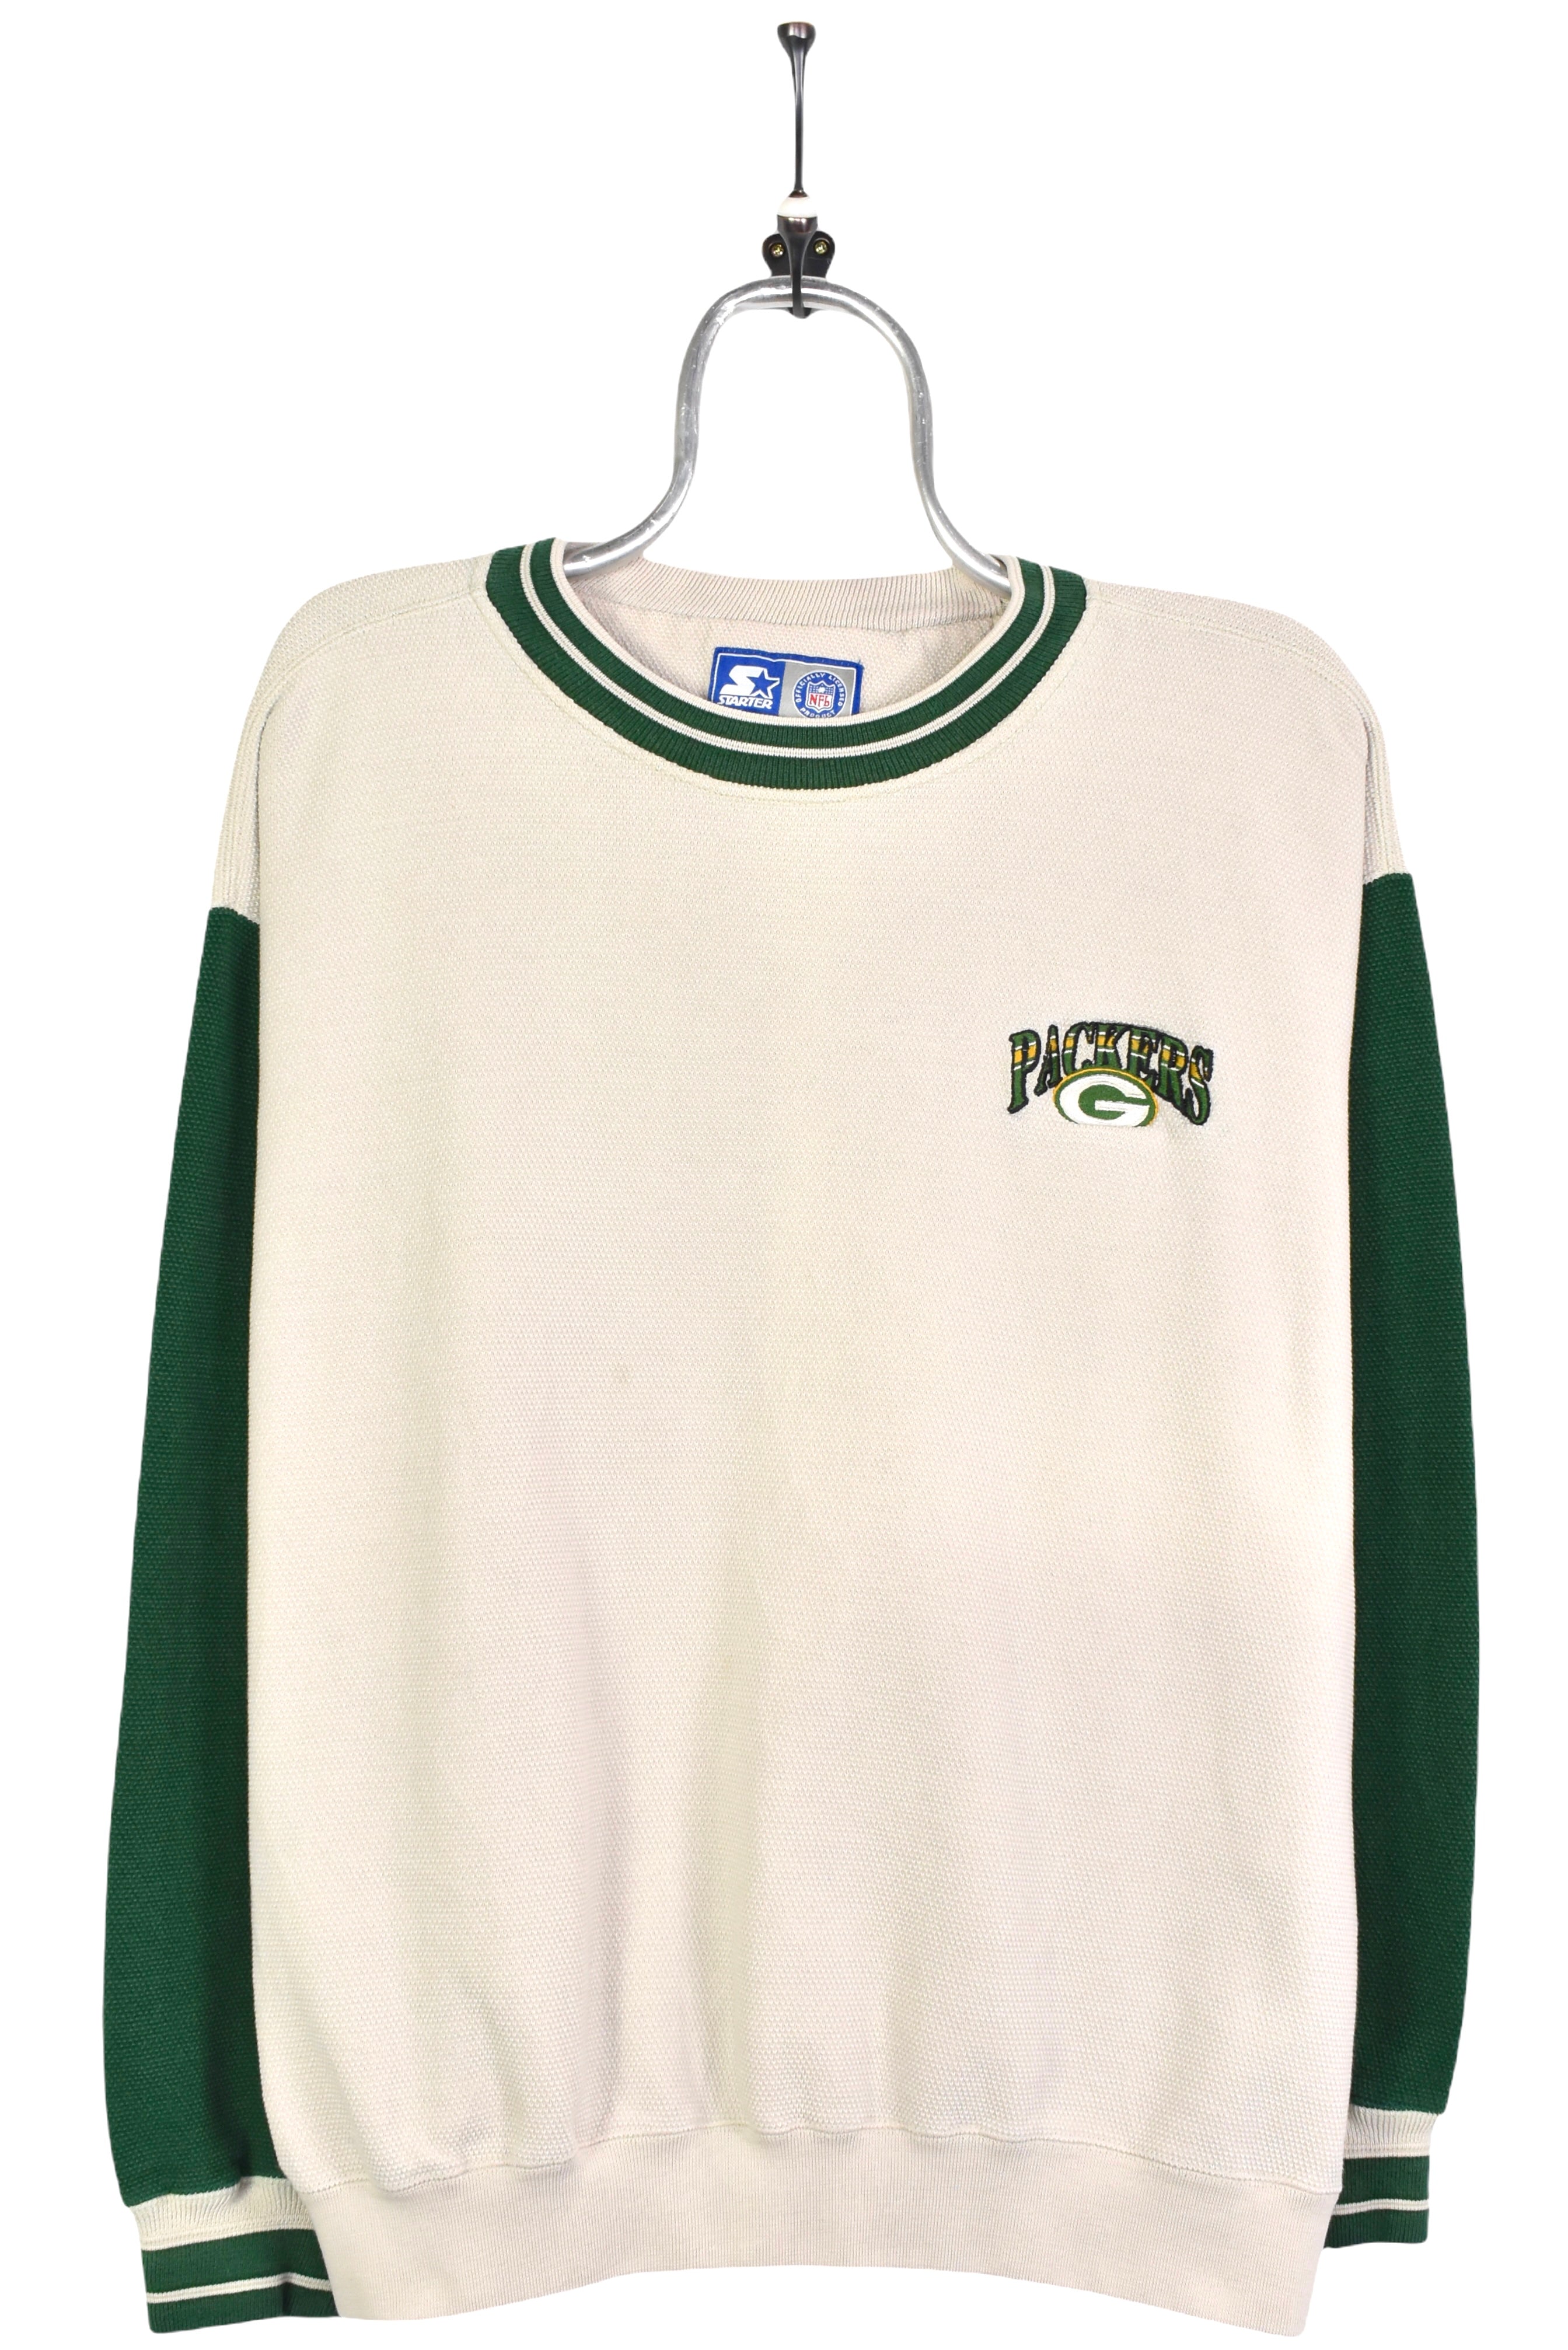 Vintage NFL Green Bay Packers embroidered cream sweatshirt | Large PRO SPORT